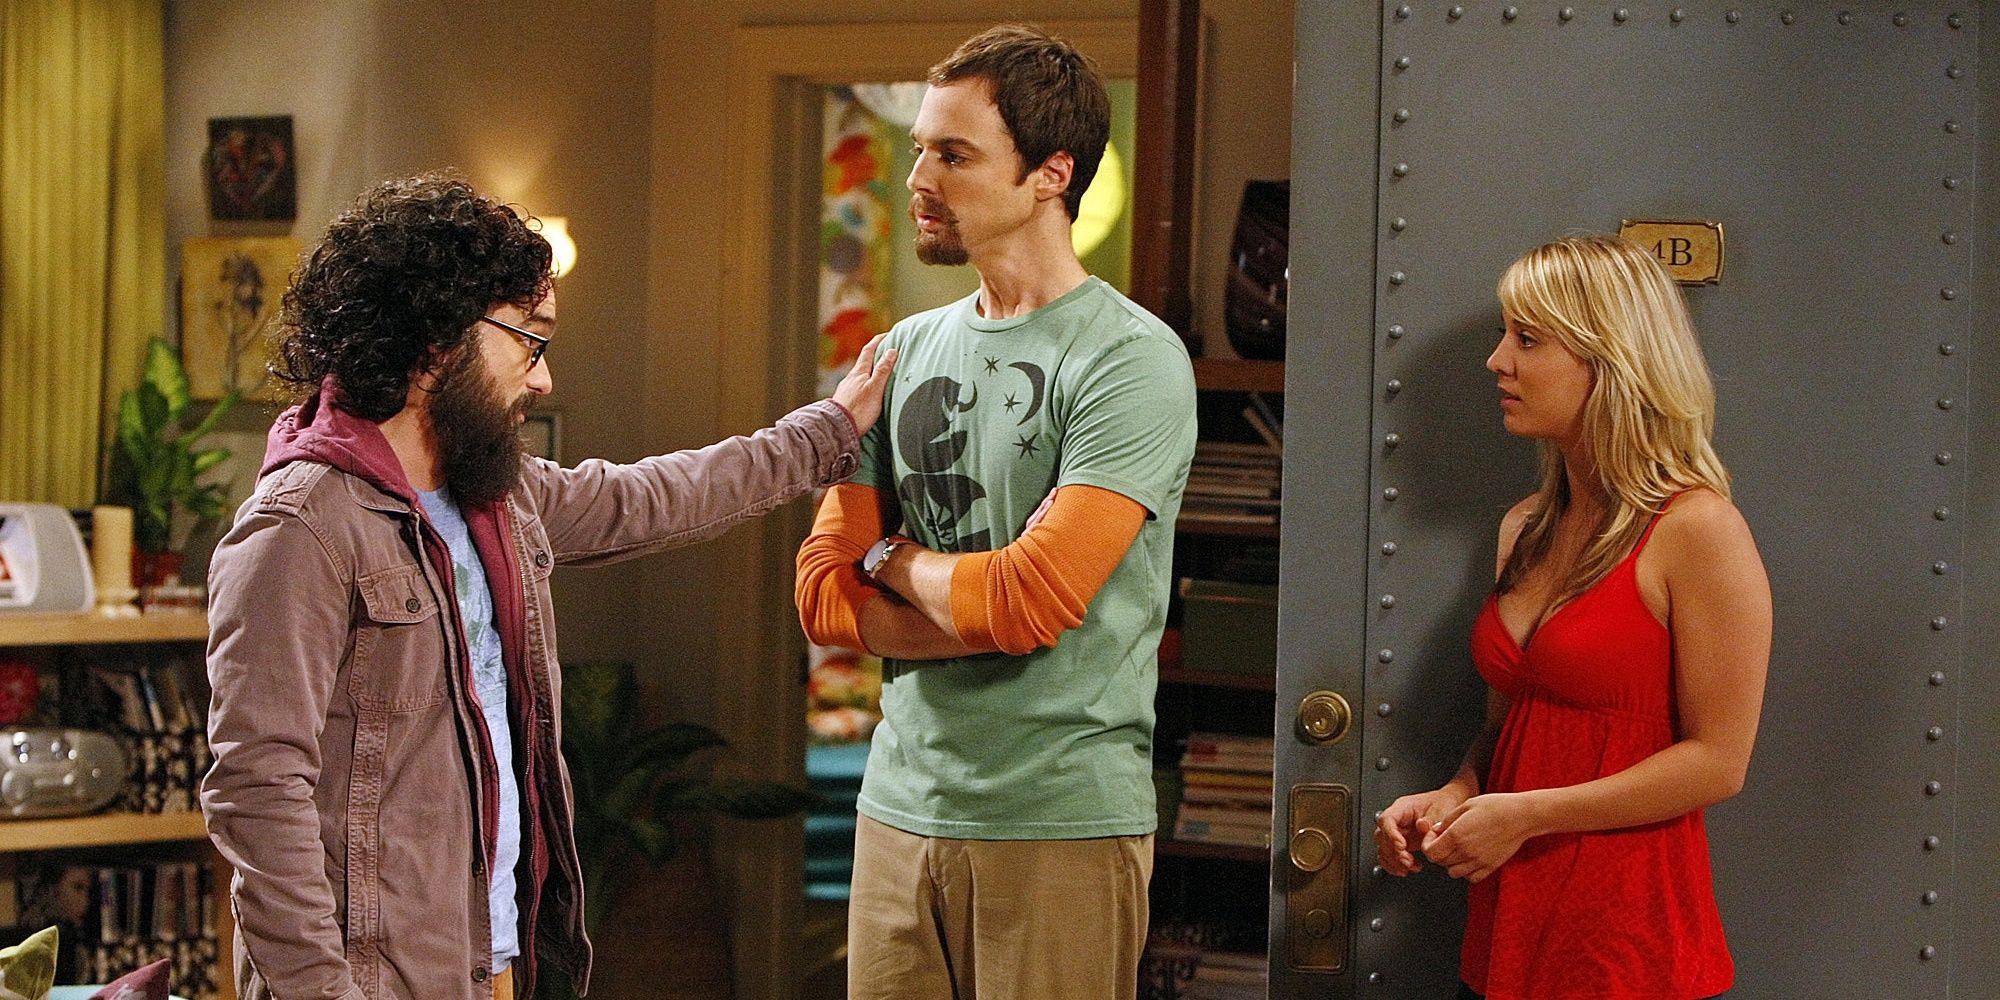 Leonard and Sheldon about to hug in front of Penny